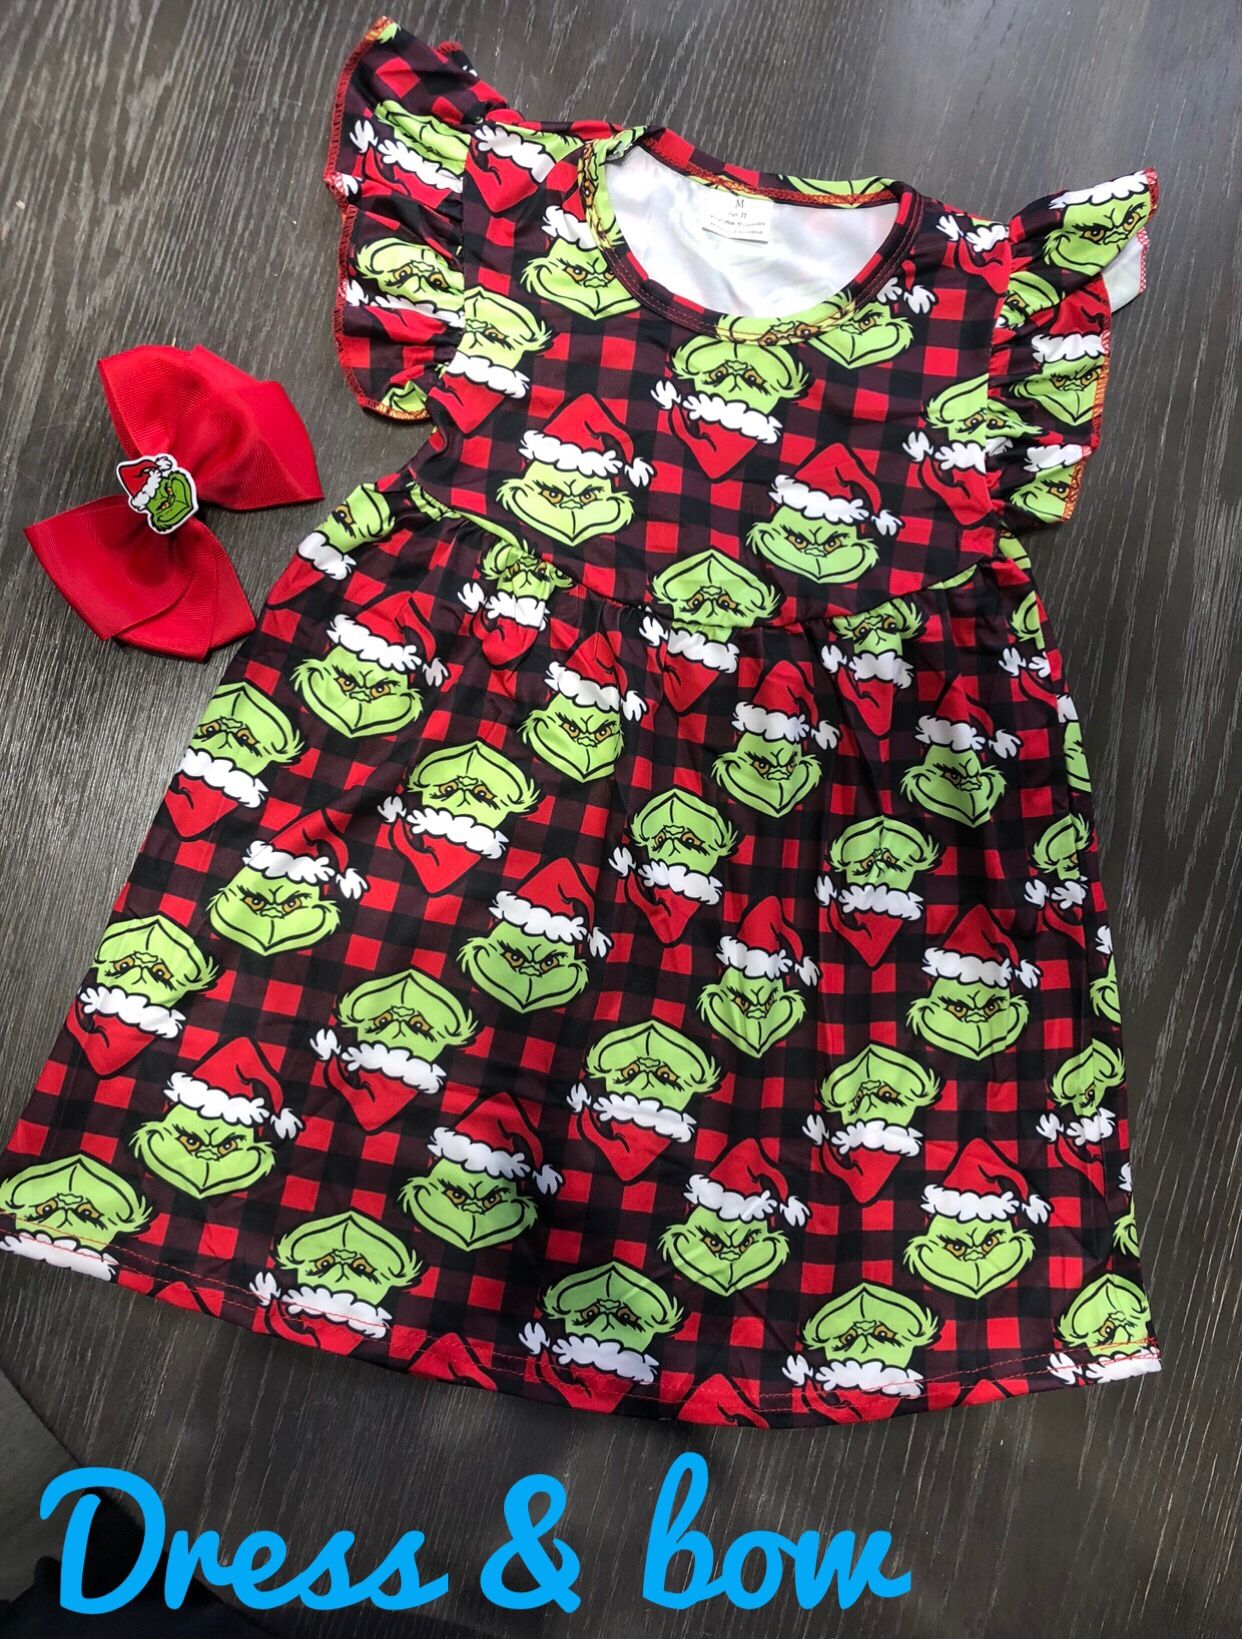 The Grinch Dress And Bow 